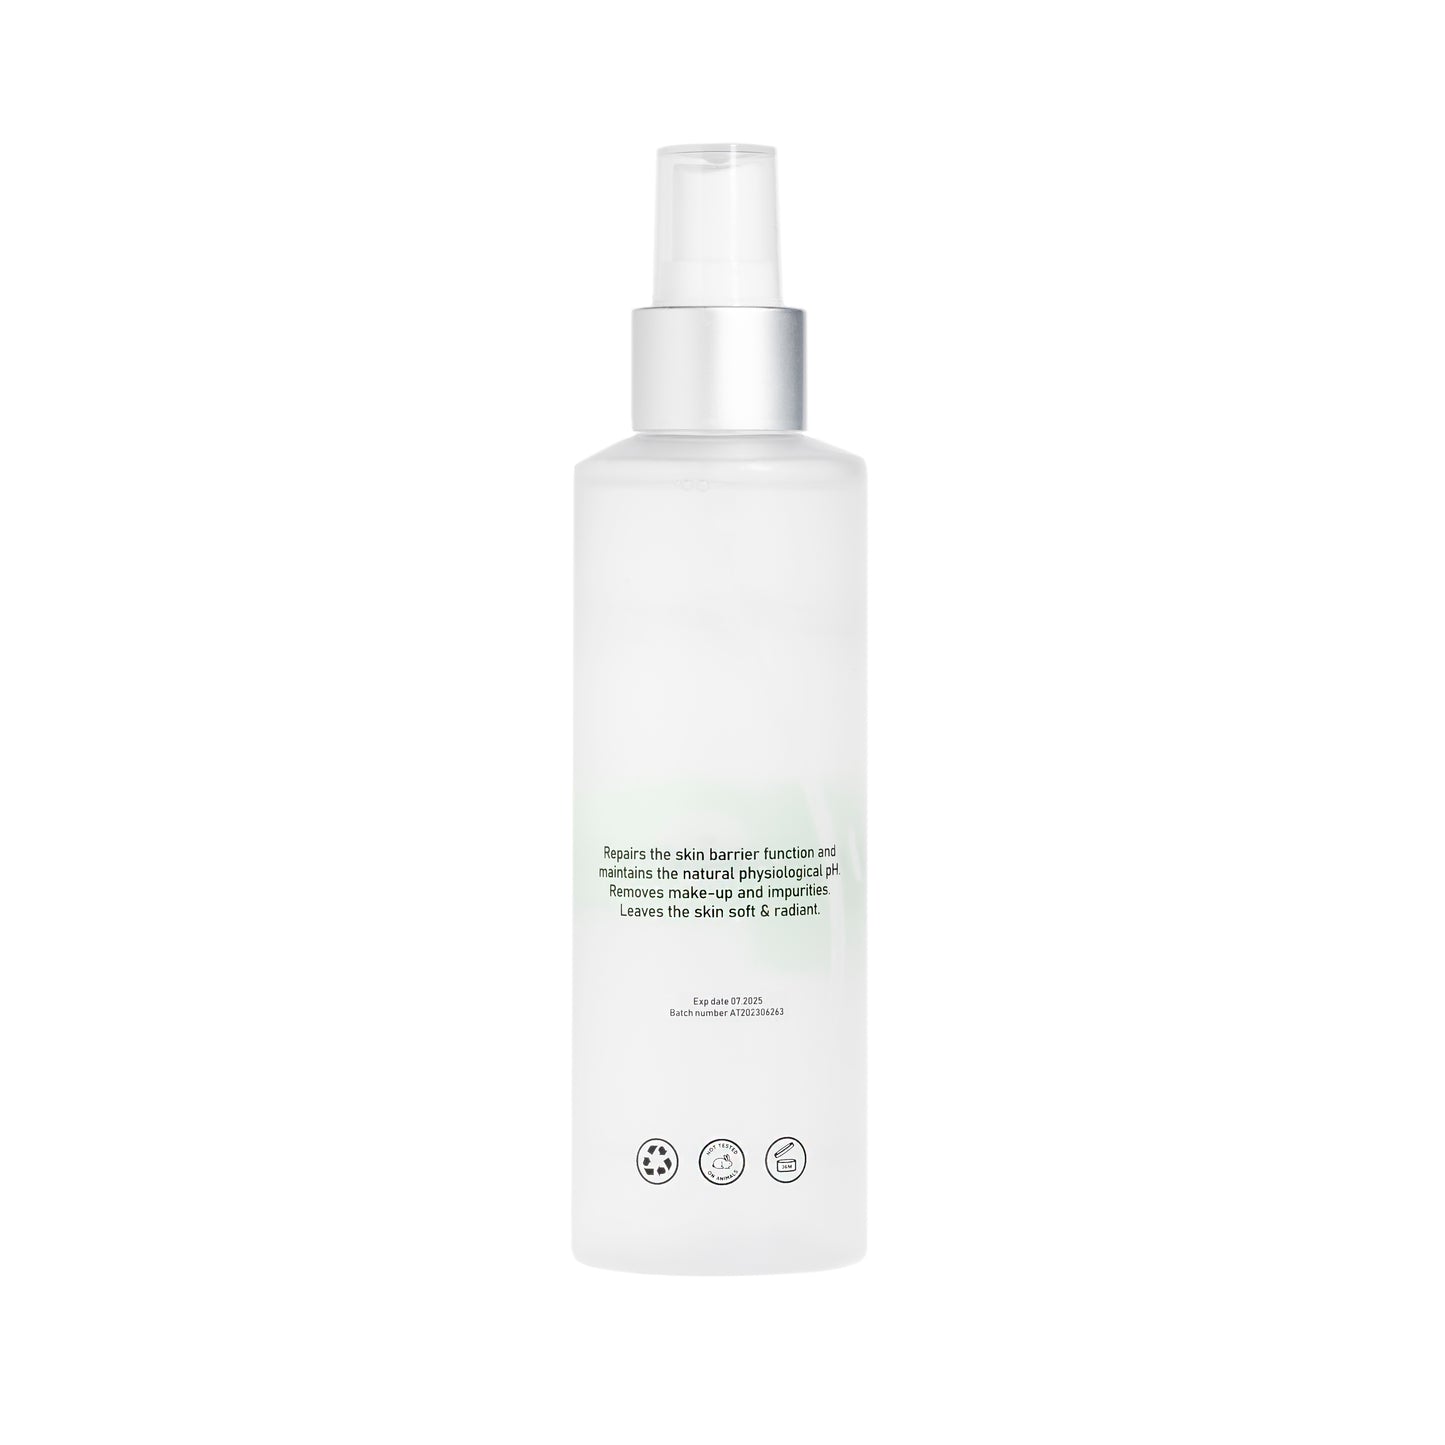 Autography Micellar water for all skin types with prebiotics 200 ml